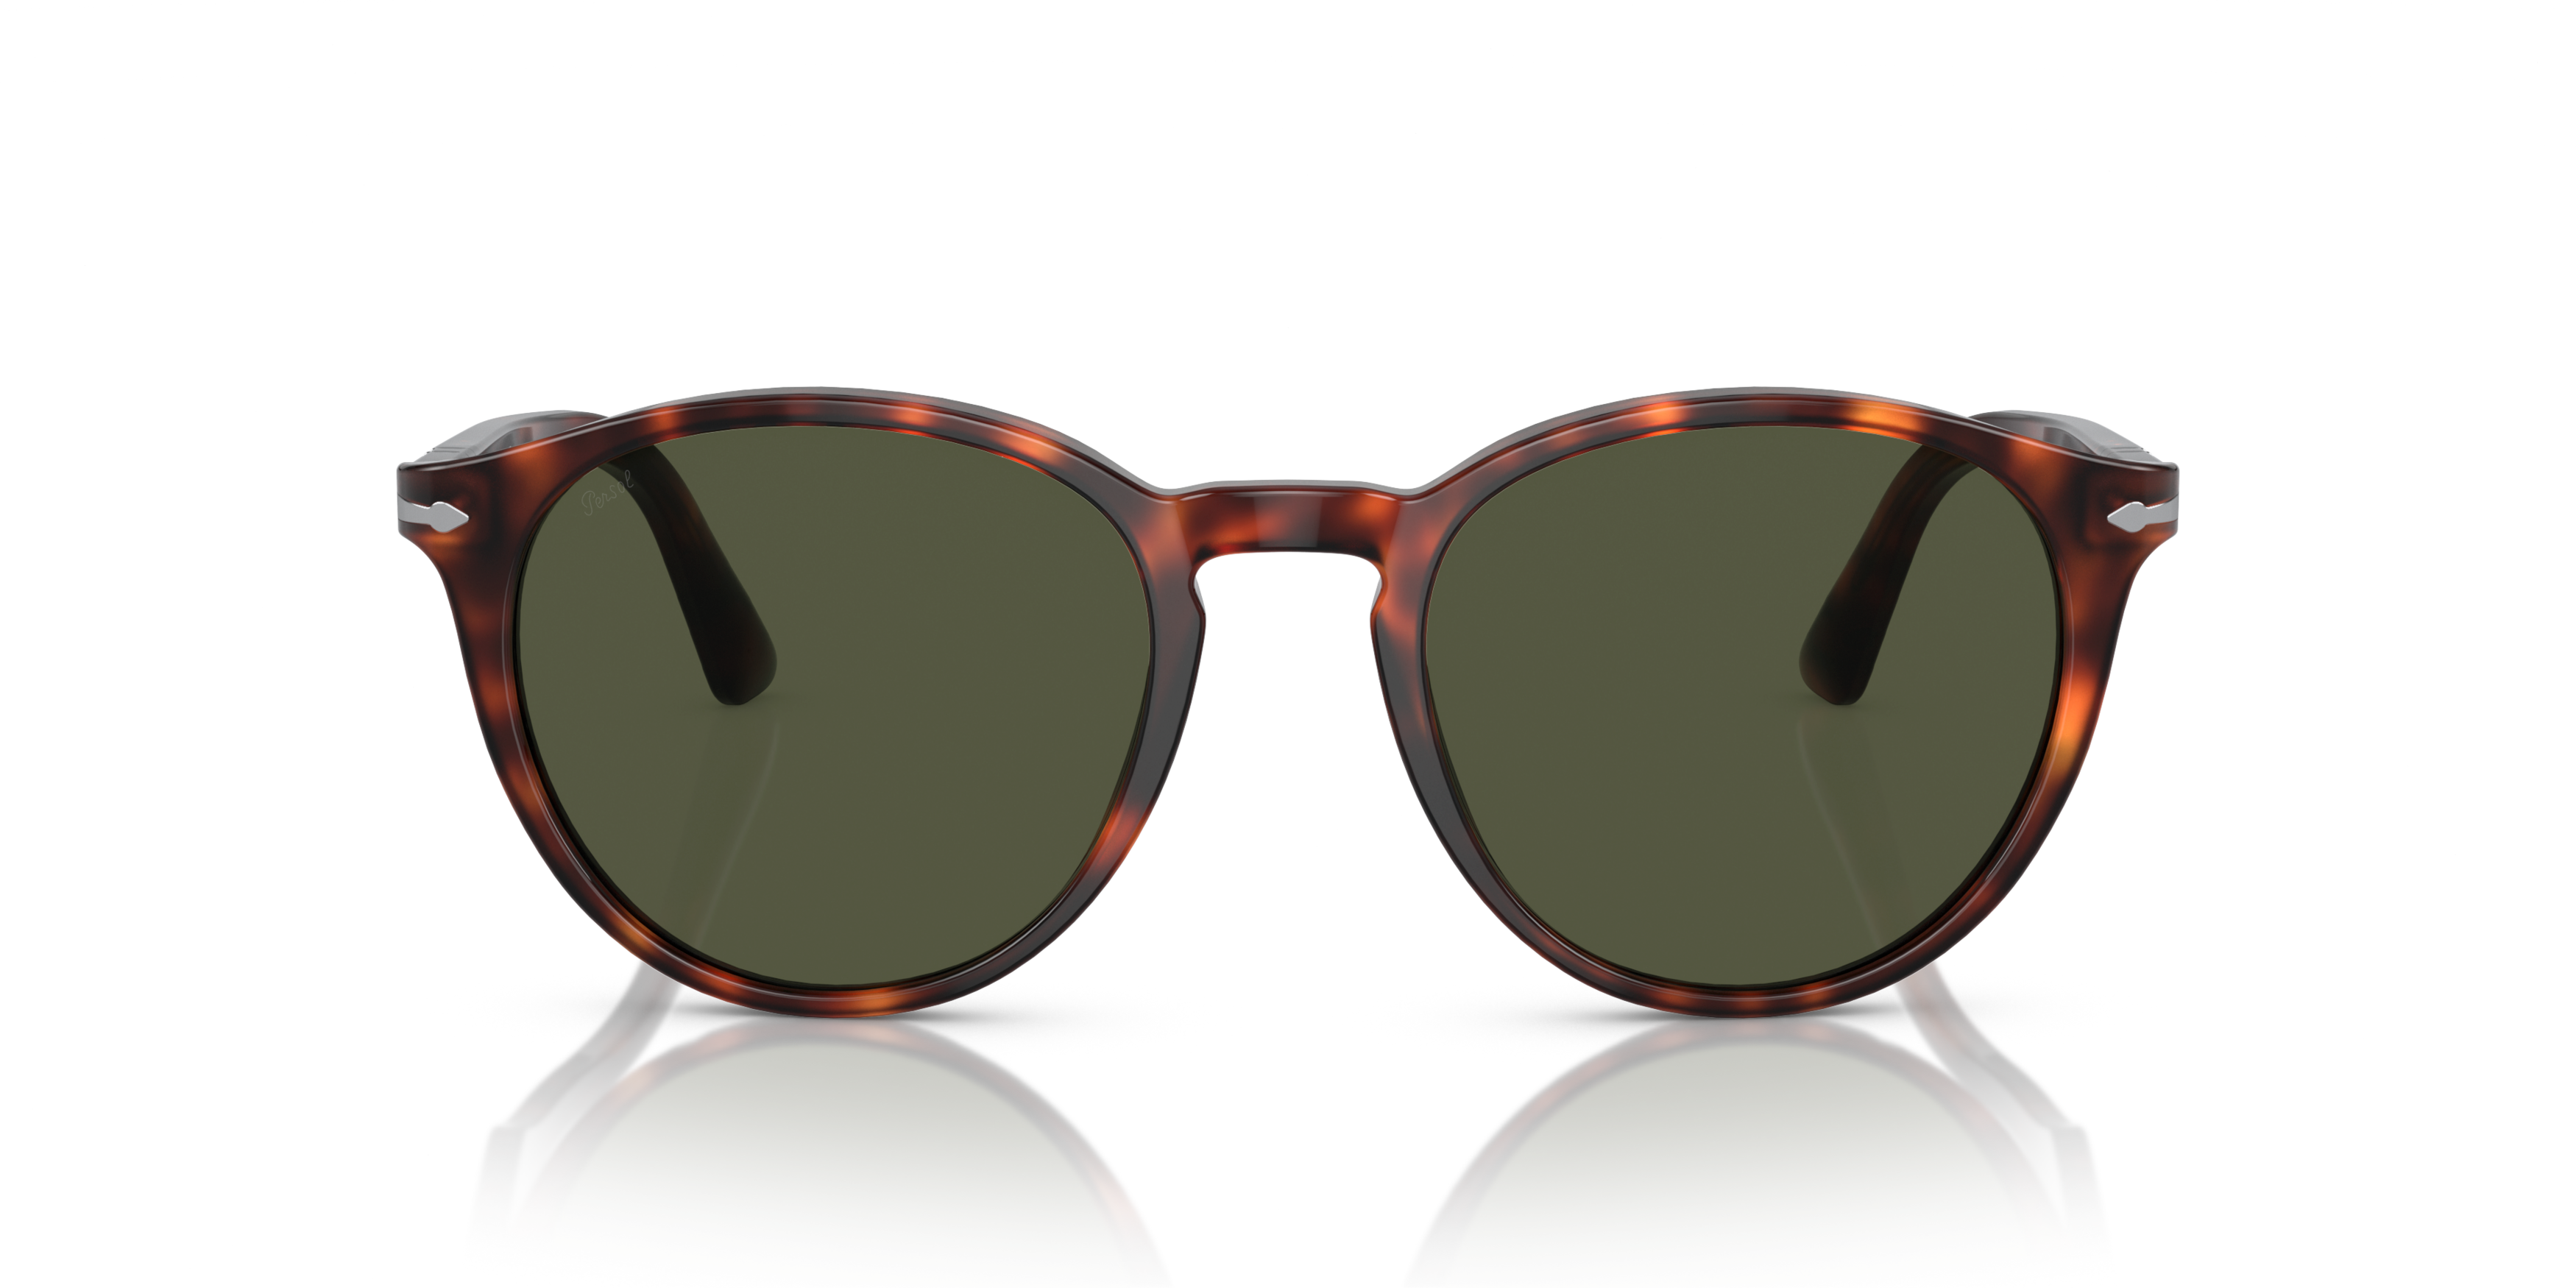 [products.image.front] Persol 0PO3152S 901531